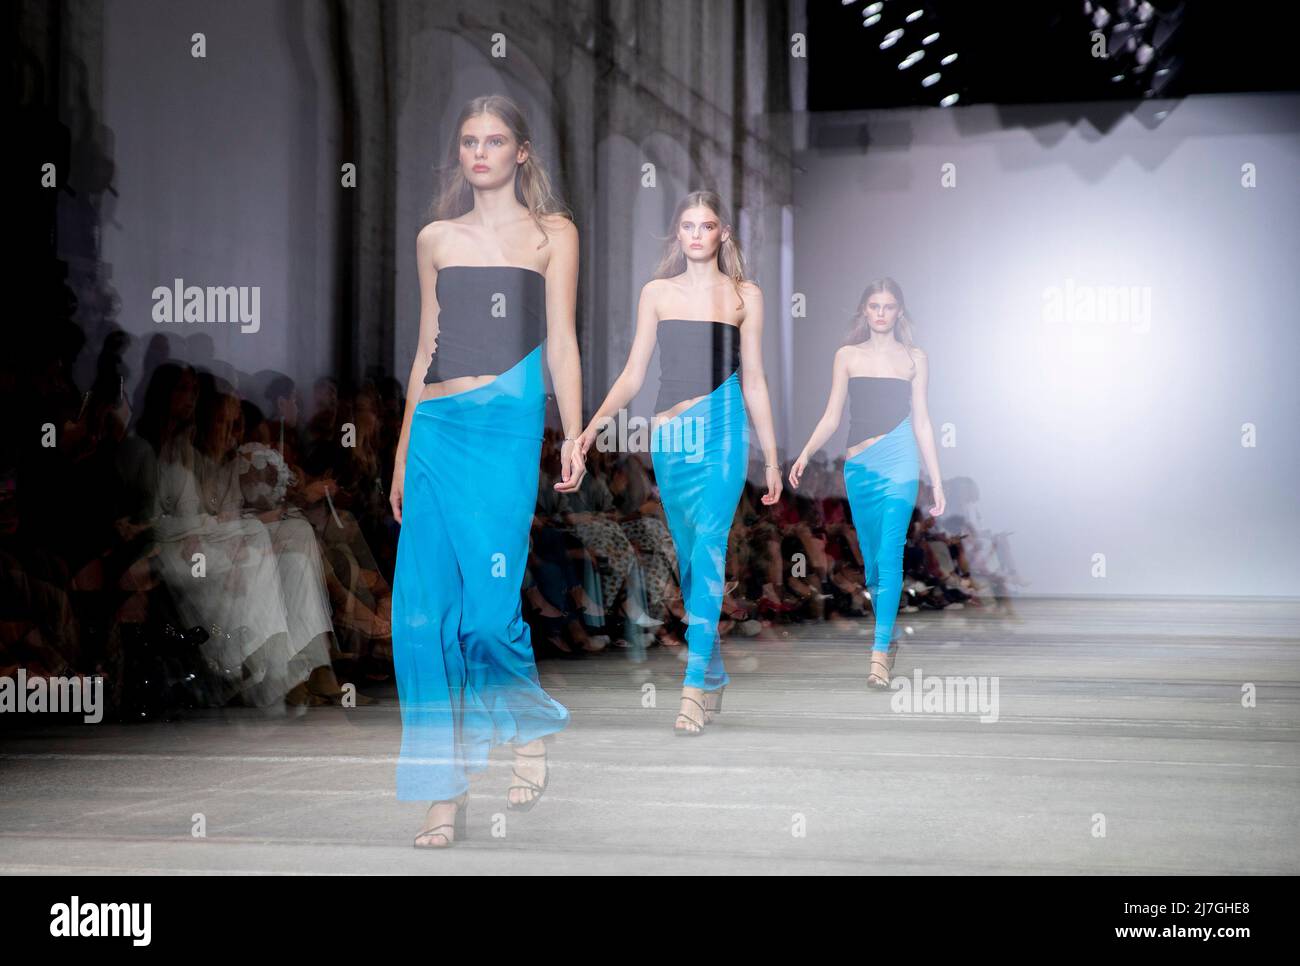 Sydney, Australia. 9th May, 2022. Multiple exposure photo shows a model walking on catwalk during the Afterpay Australian Fashion Week (AAFW) in Sydney, Australia, on May 9, 2022. The AAFW kicked off on Monday with an array of local brands showcasing their resort collections in Sydney. Credit: Bai Xuefei/Xinhua/Alamy Live News Stock Photo